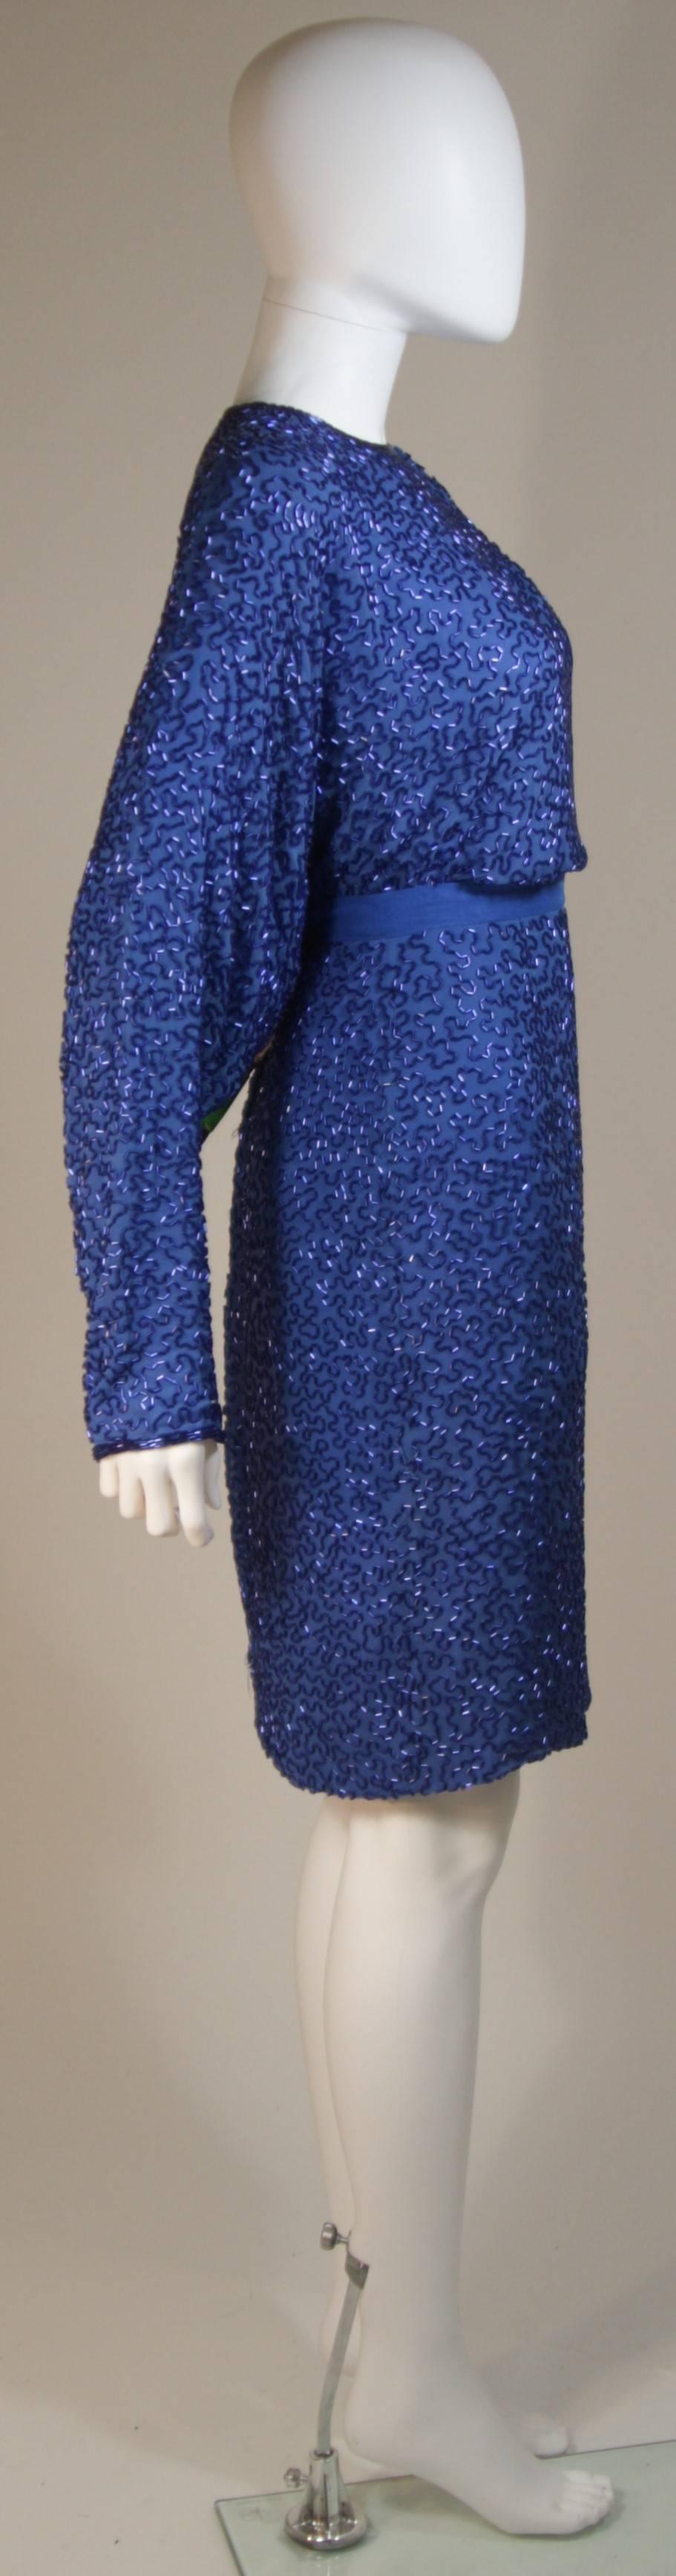 STEPHEN YEARIK Royal Blue Silk Beaded Skirt Ensemble Size 4-6  In Excellent Condition For Sale In Los Angeles, CA